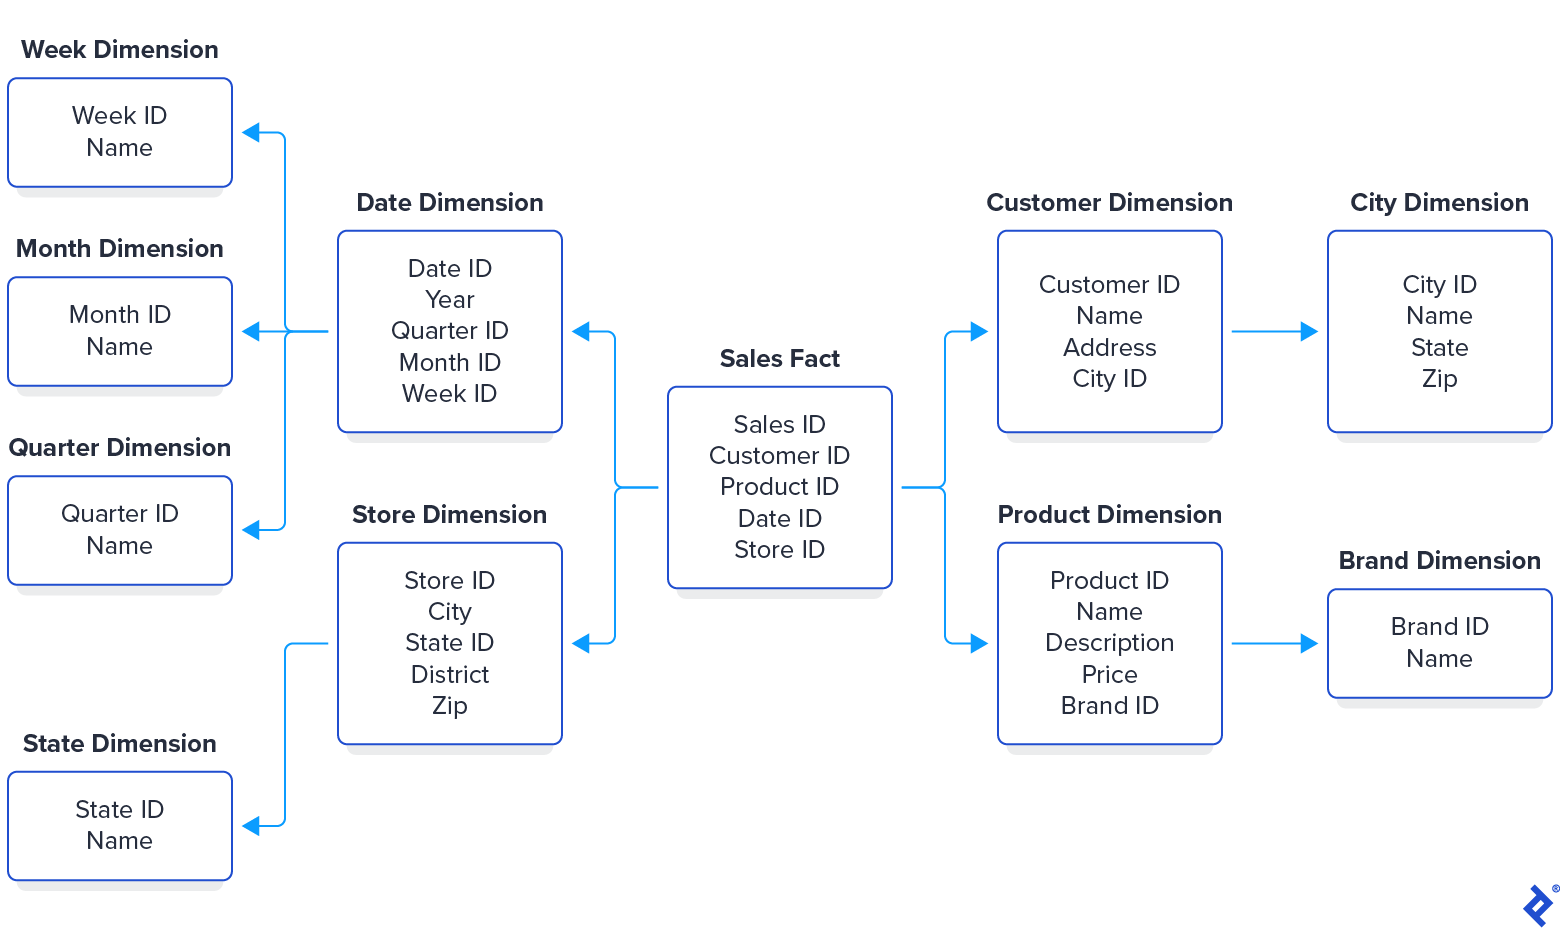 The previous star schema extended to become a snowflake schema. The original five tables are still present, but each dimension table now links to further sub-dimension tables. For example, the Customer Dimension table consisted of a customer ID, name, address, and city; here the city is replaced with a city ID, linking it to a City Dimension table that stores a city name, state name, and zip/postal code for each city id.